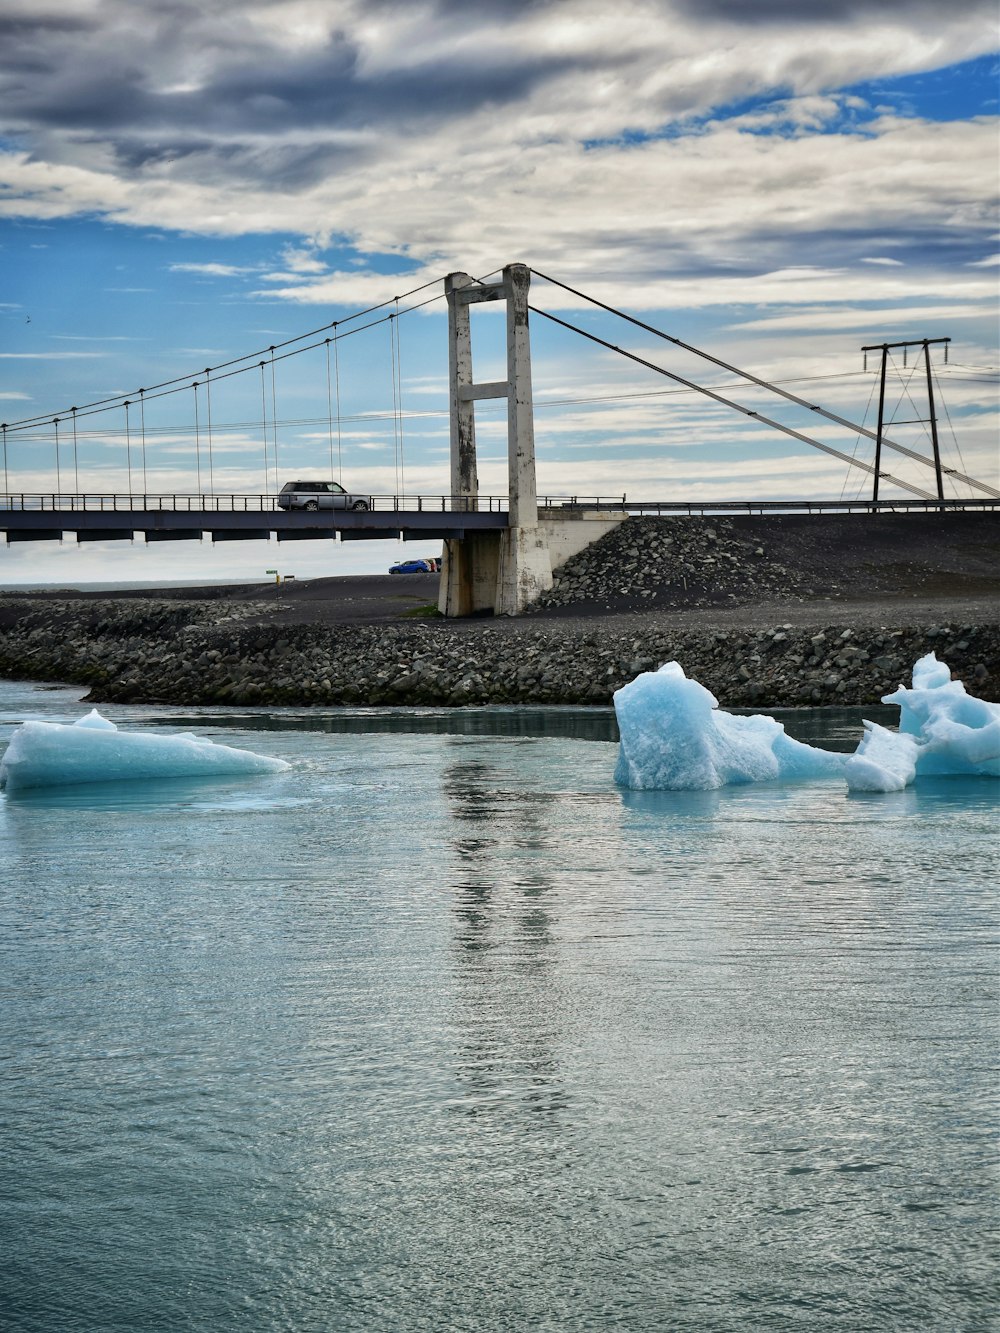 icebergs floating in the water near a bridge